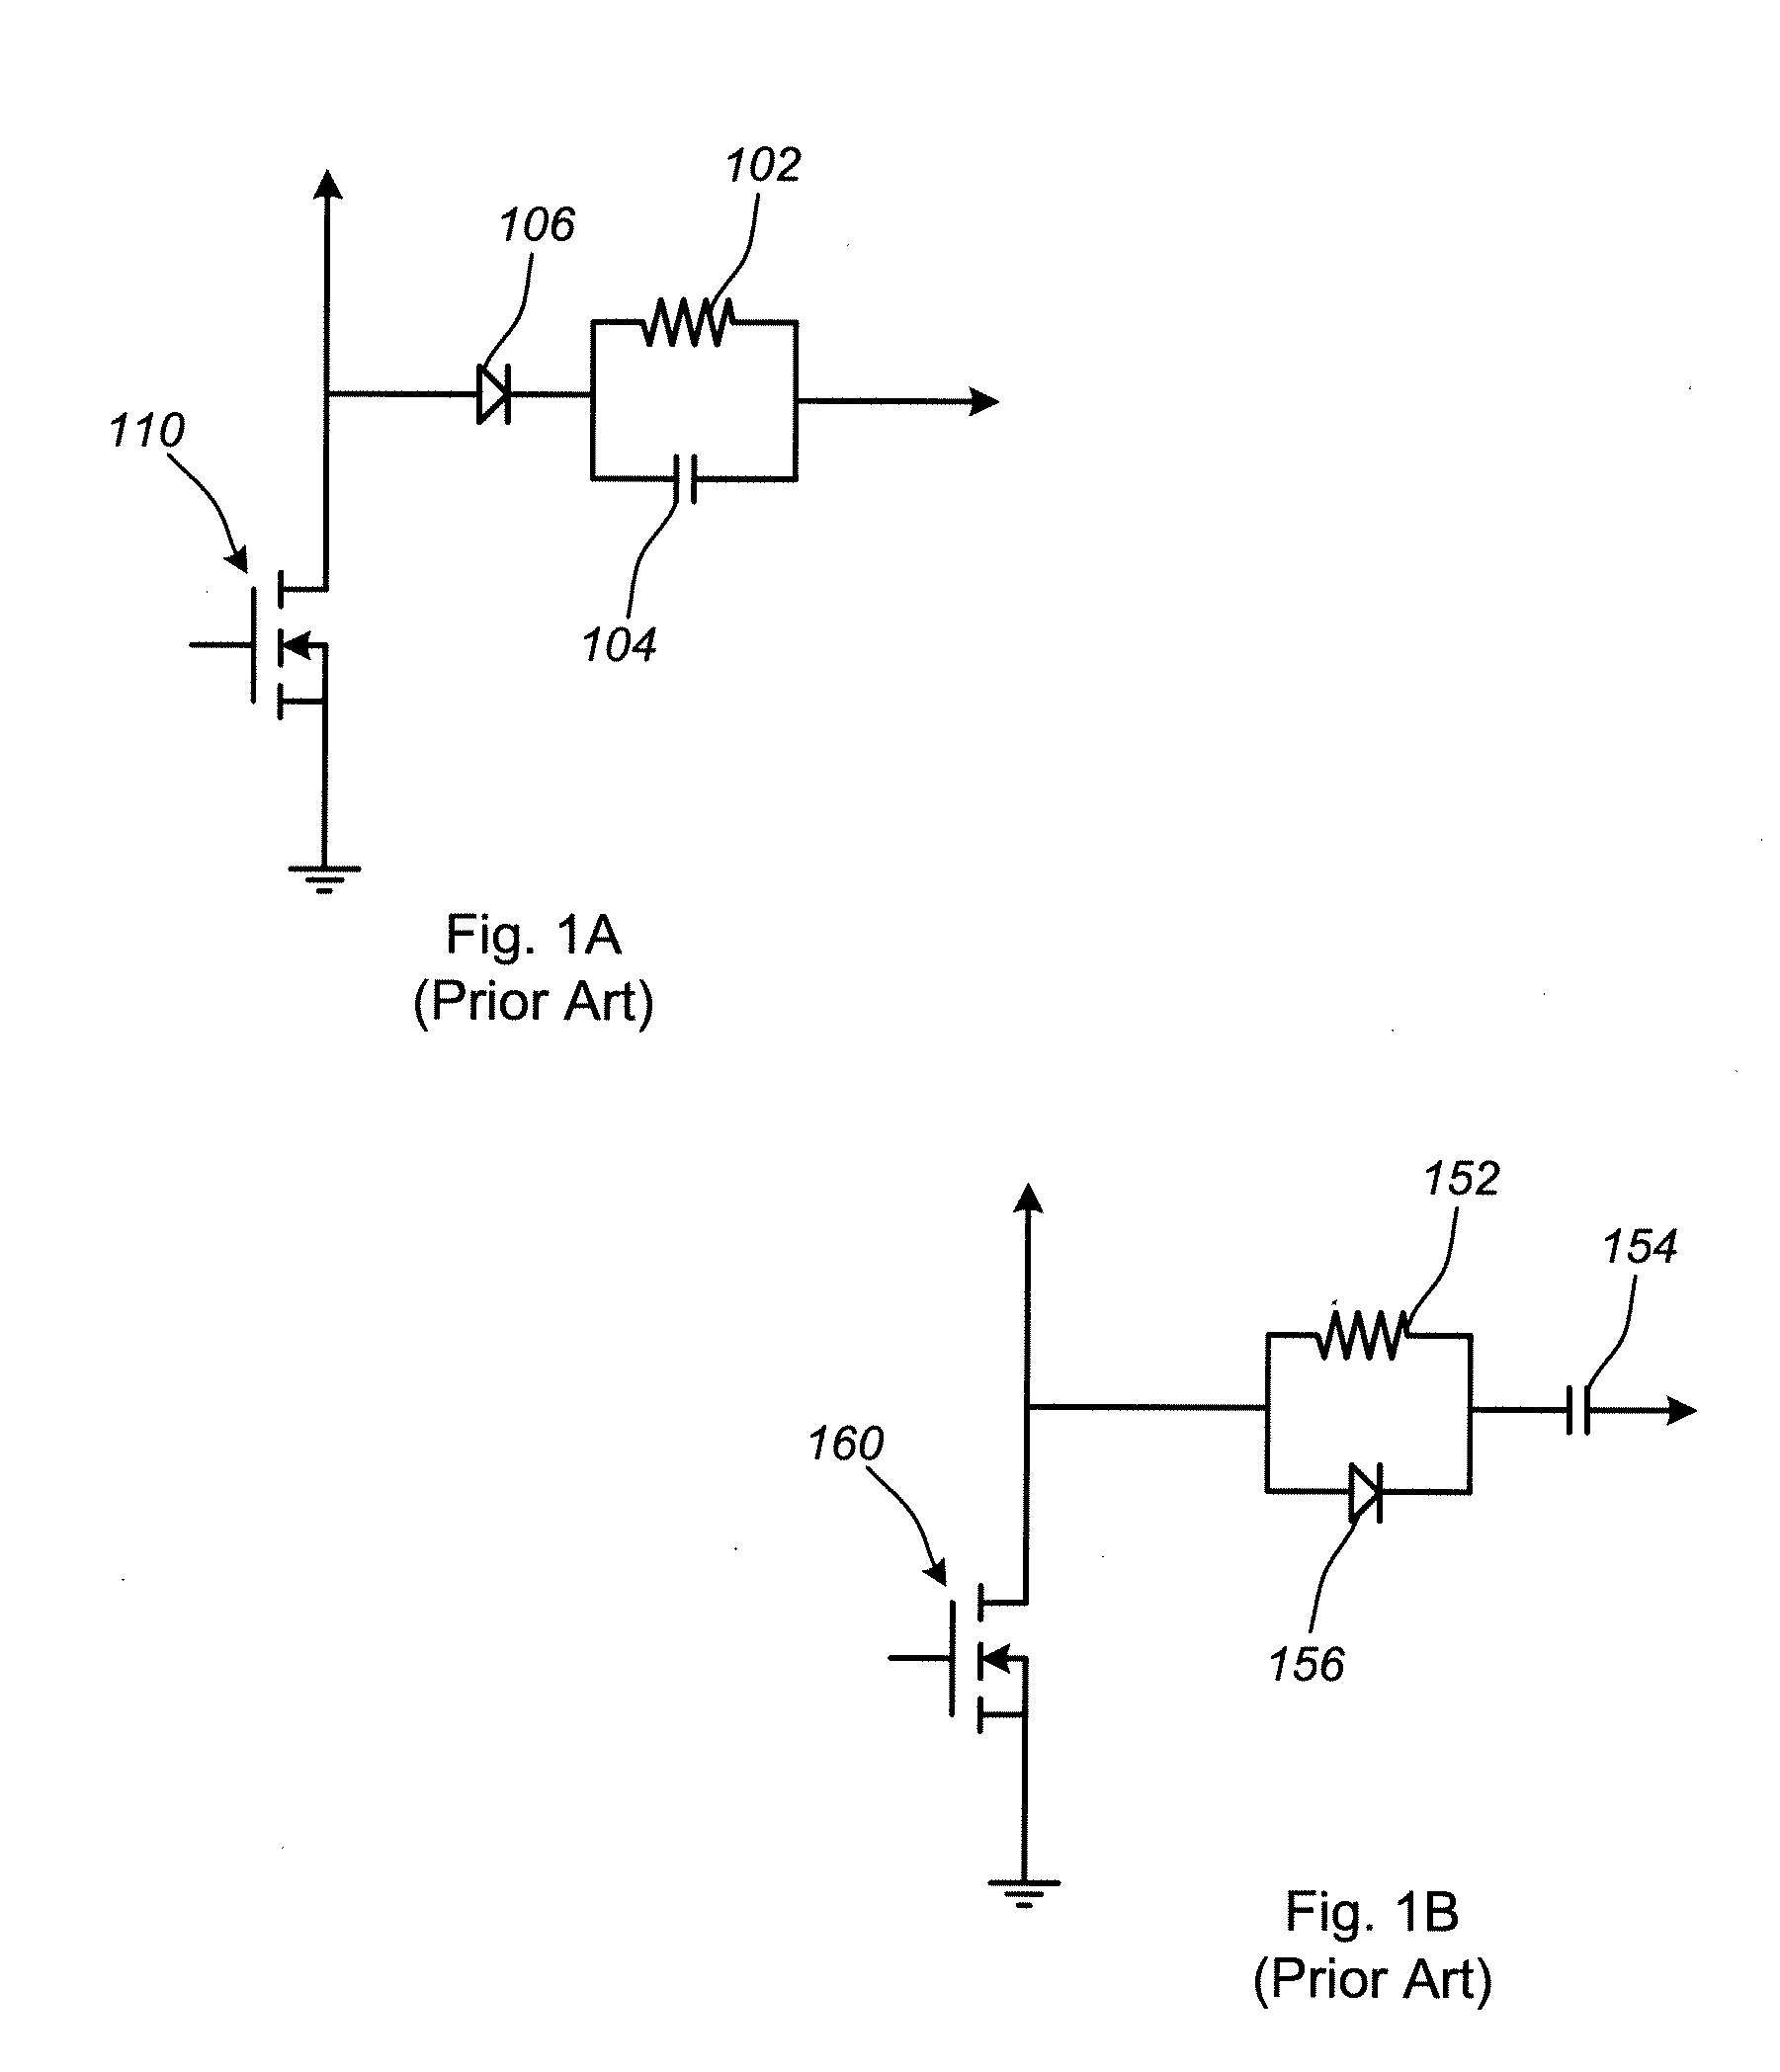 Optimal mosfet driver circuit for reducing electromagnetic interference and noise